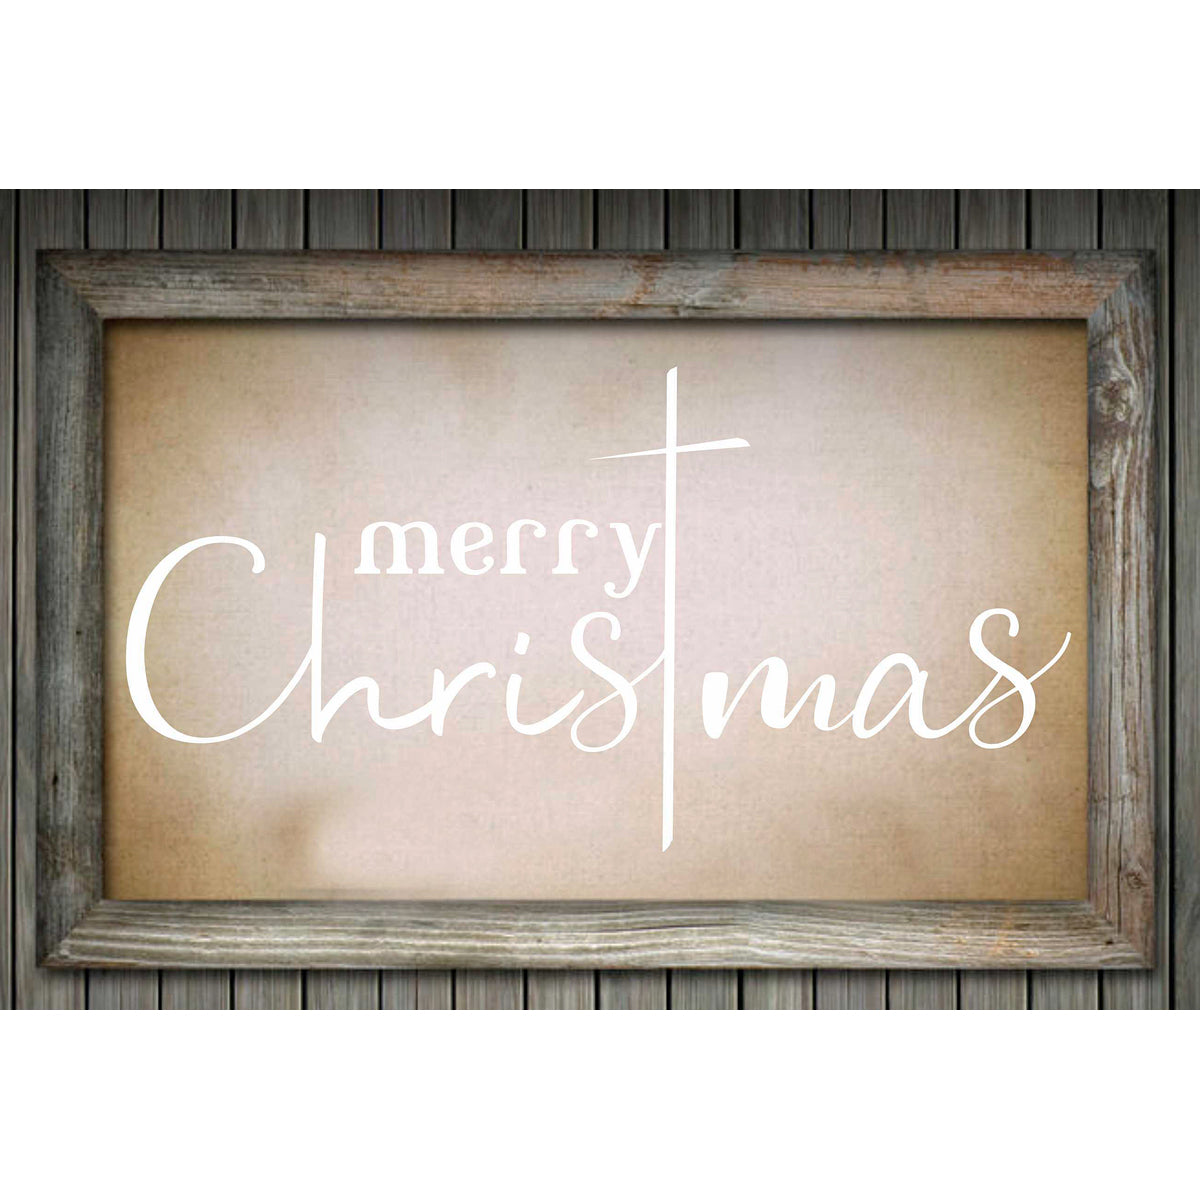 merry Christmas Stencil - Create Christmas Signs - Create Christmas Window Art - Superior Stencils